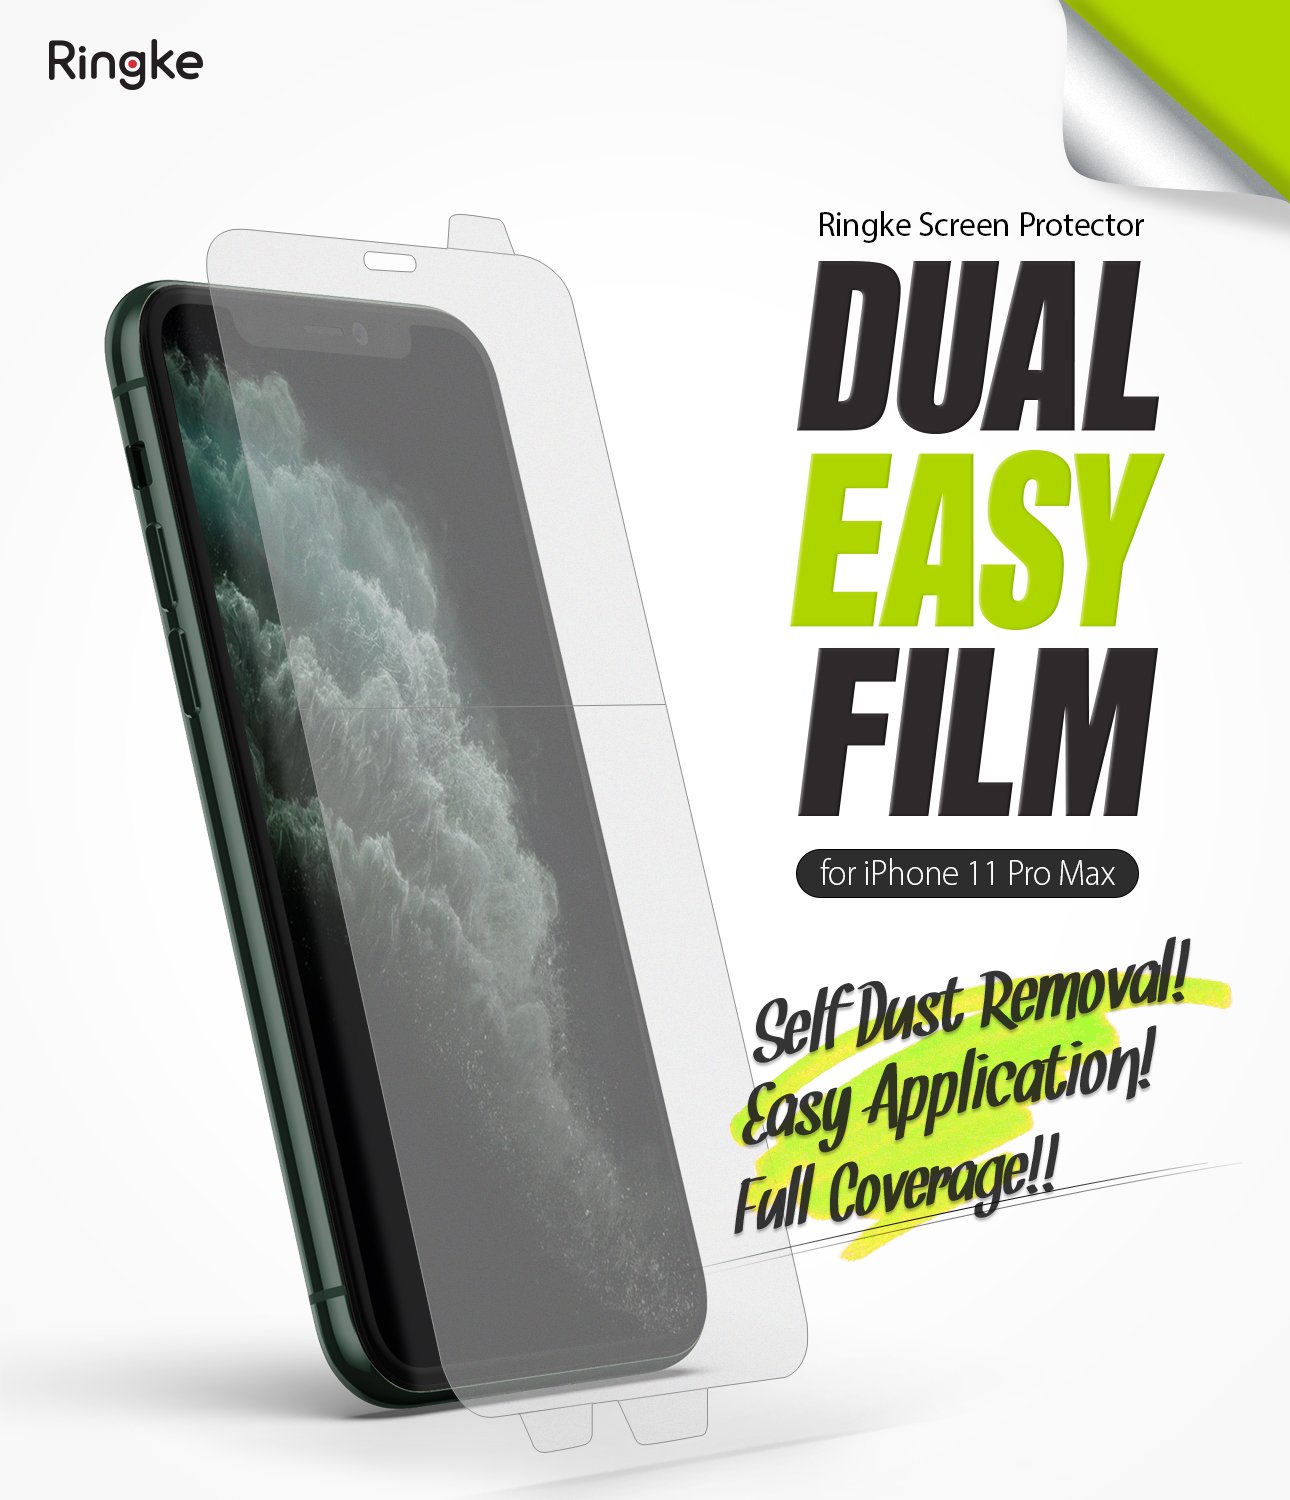 iPhone 11 Pro Max Screen Protector Dual Easy Film